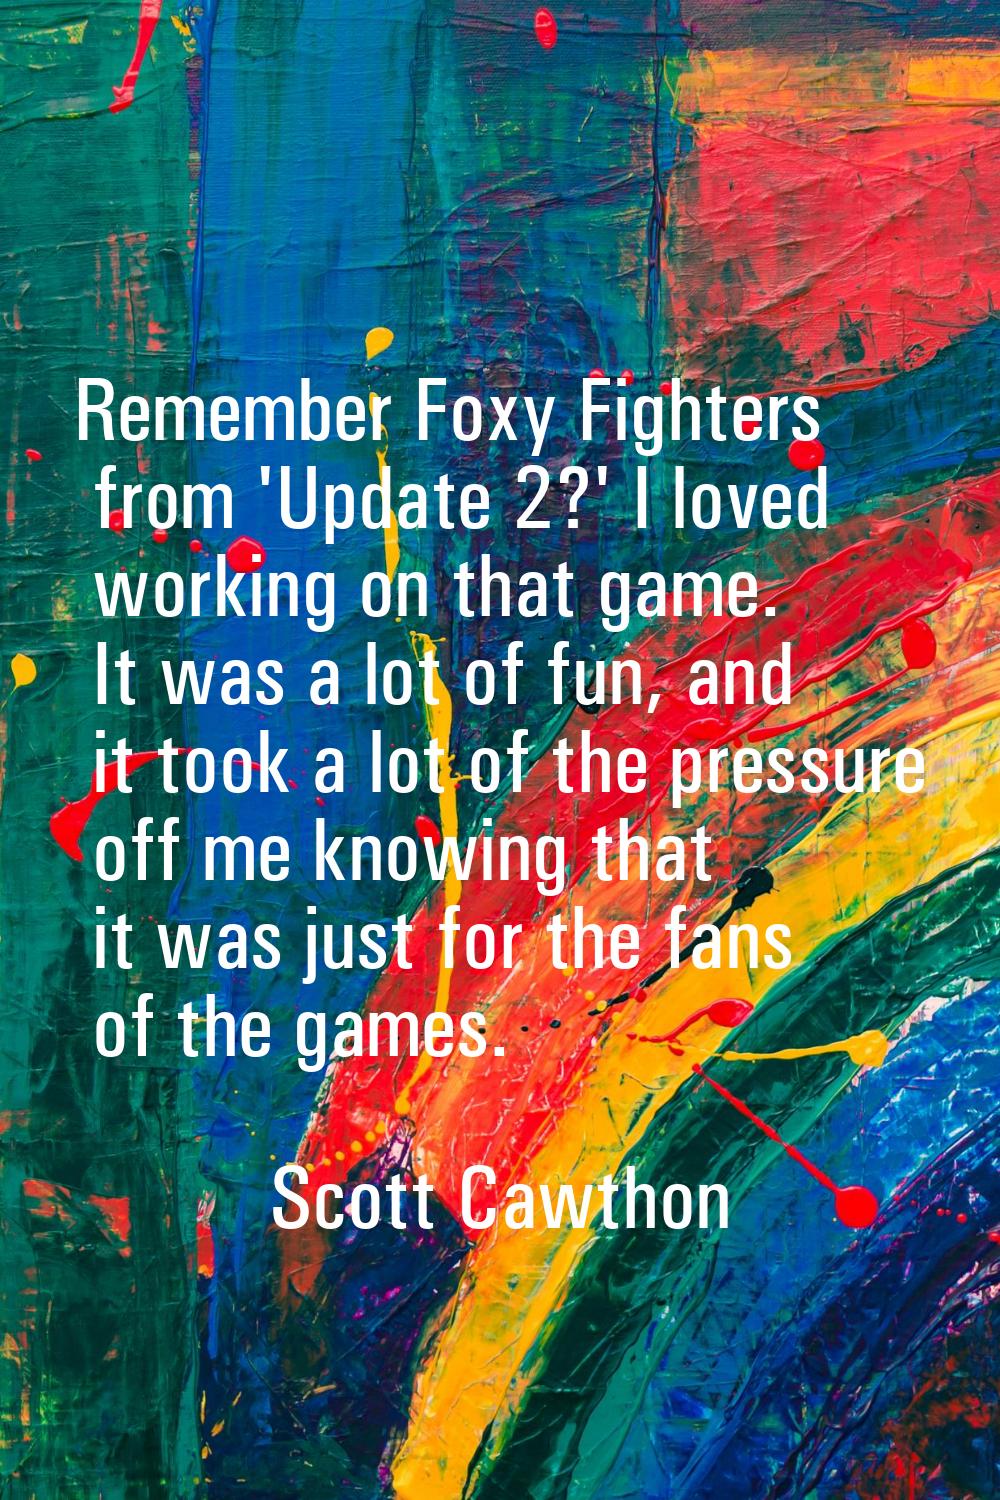 Remember Foxy Fighters from 'Update 2?' I loved working on that game. It was a lot of fun, and it t